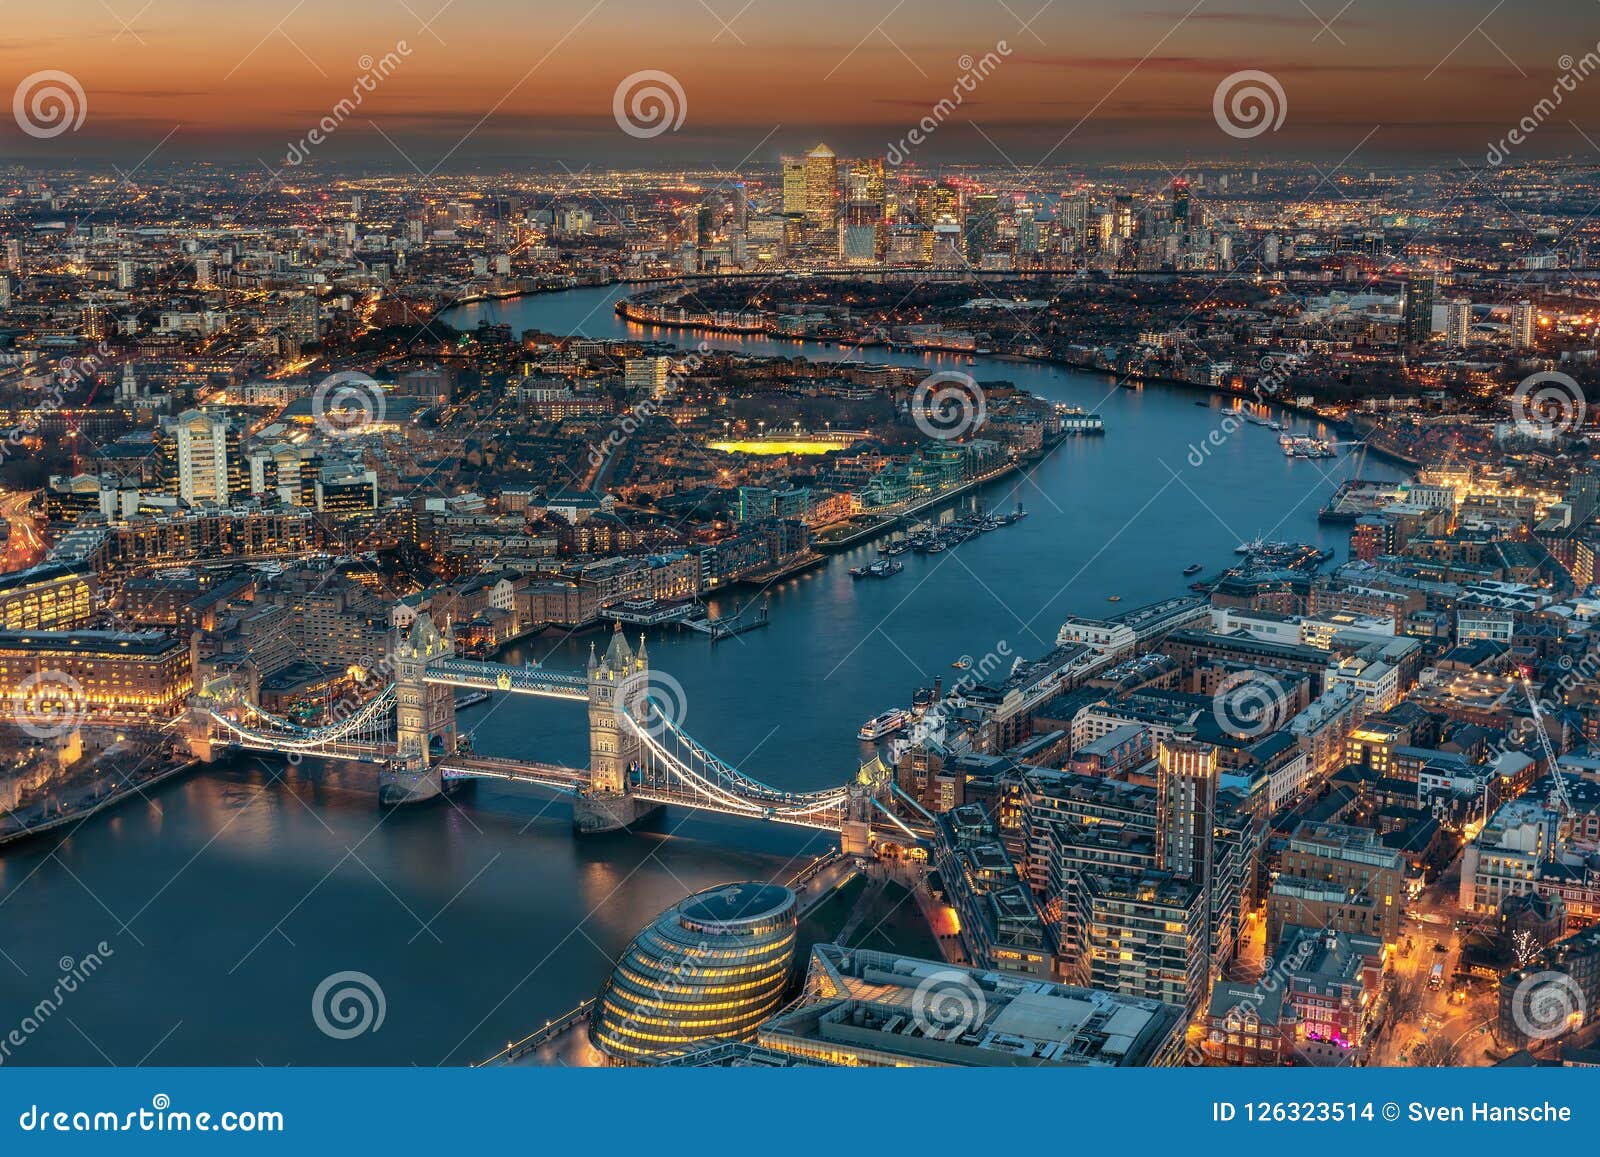 aerial view of london during evening time